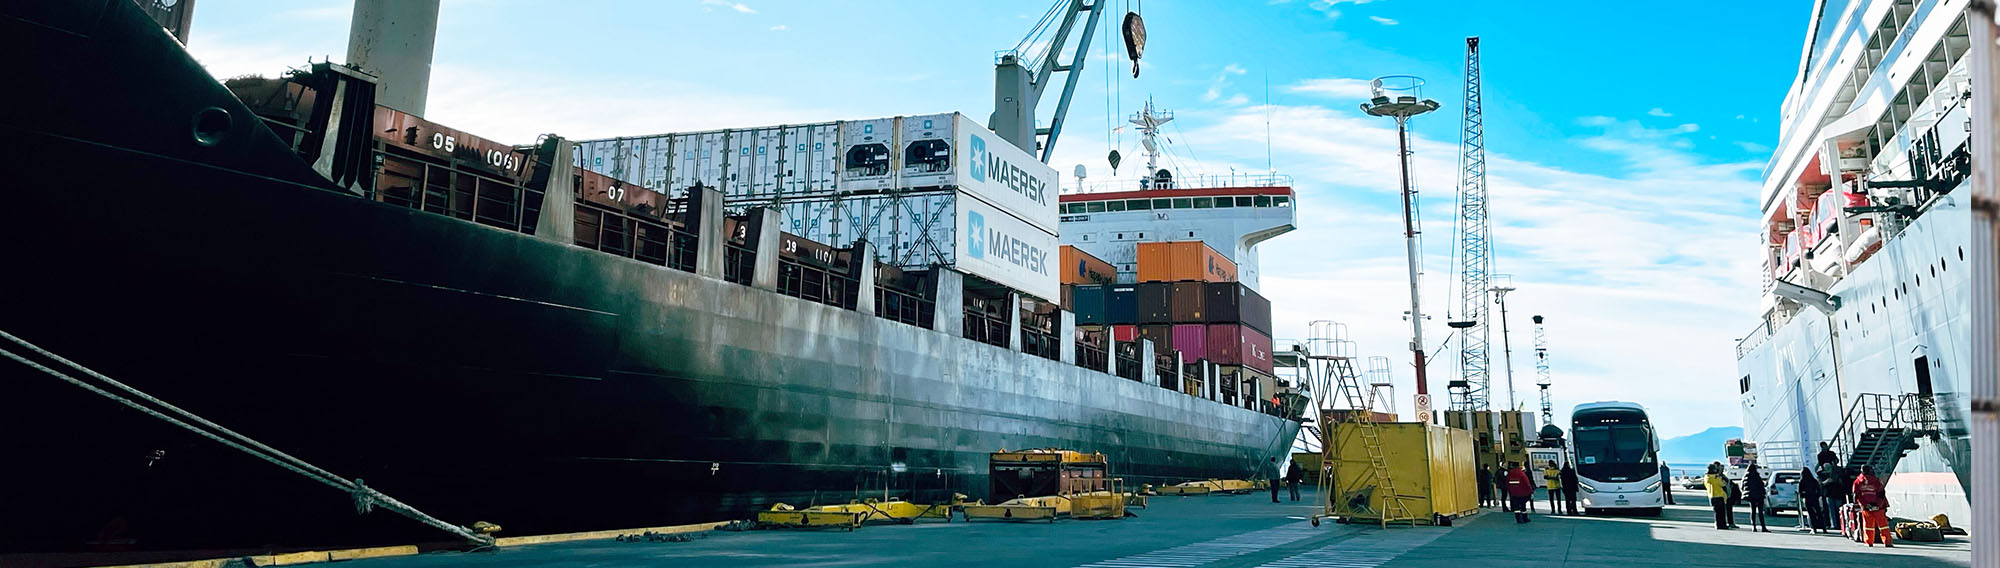 Large ship at port for importing and exporting goods.